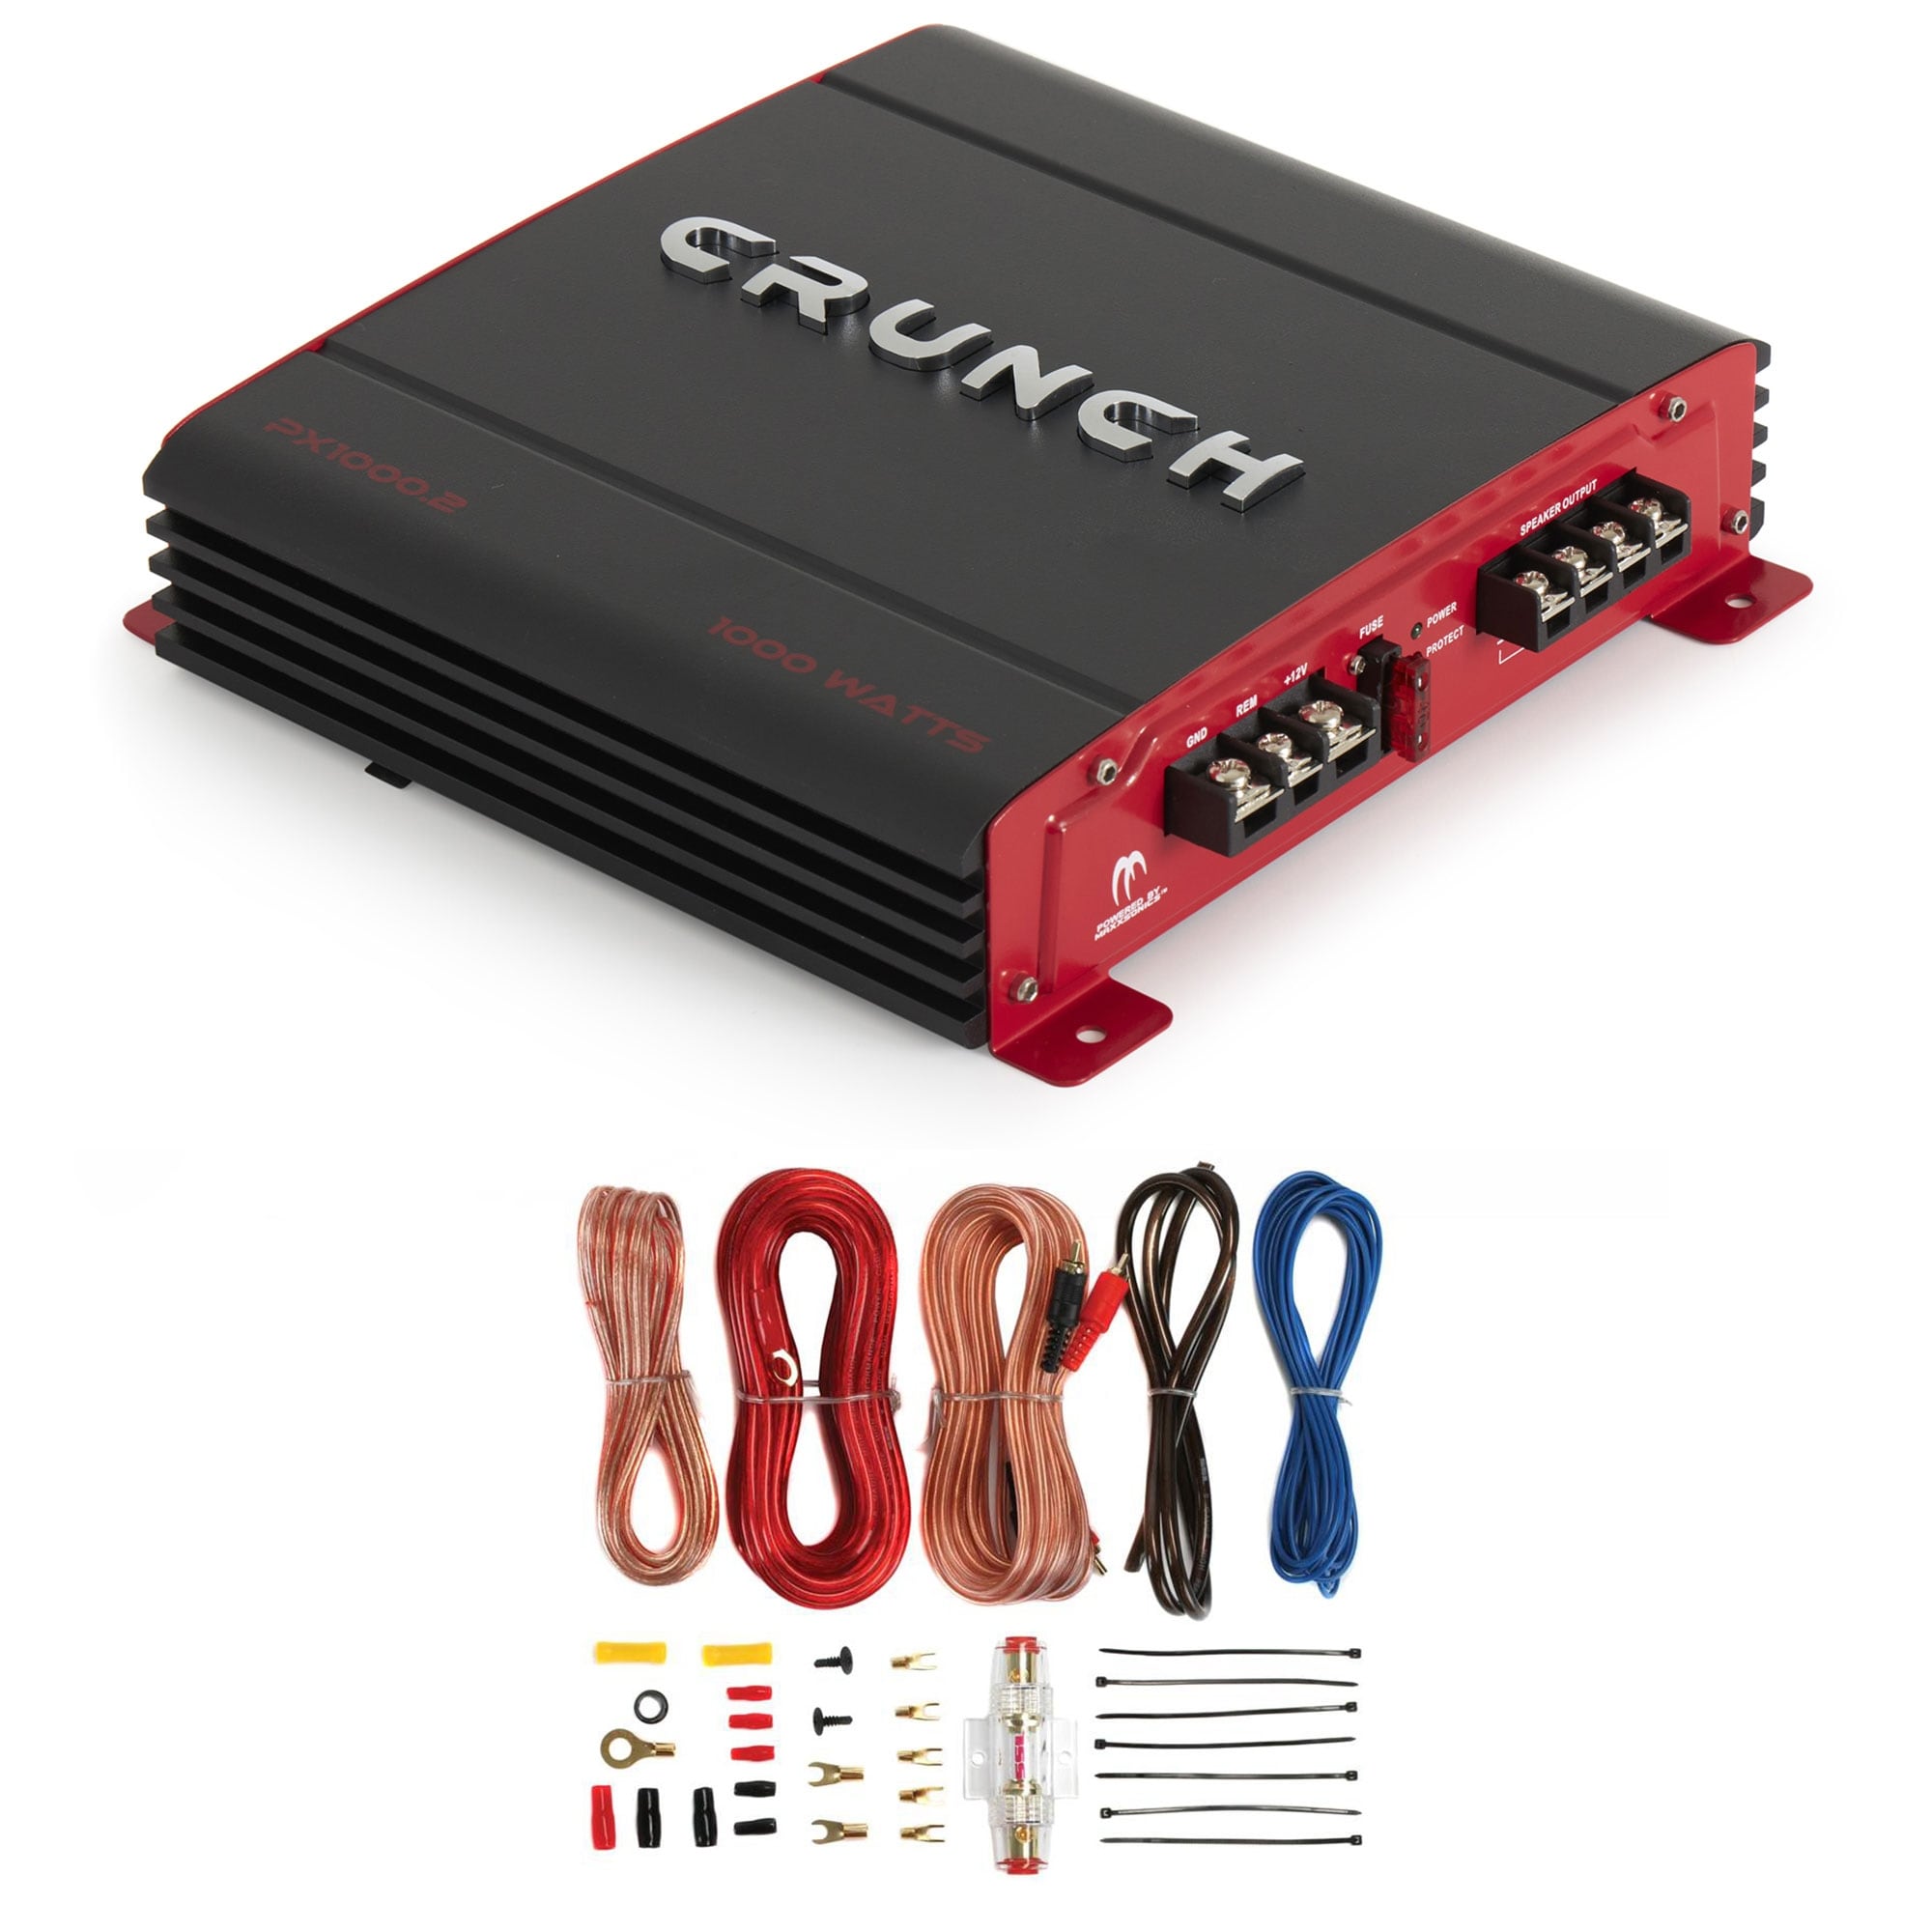 Crunch PX-1000.2 1000W Car Stereo Amp & Soundstorm...